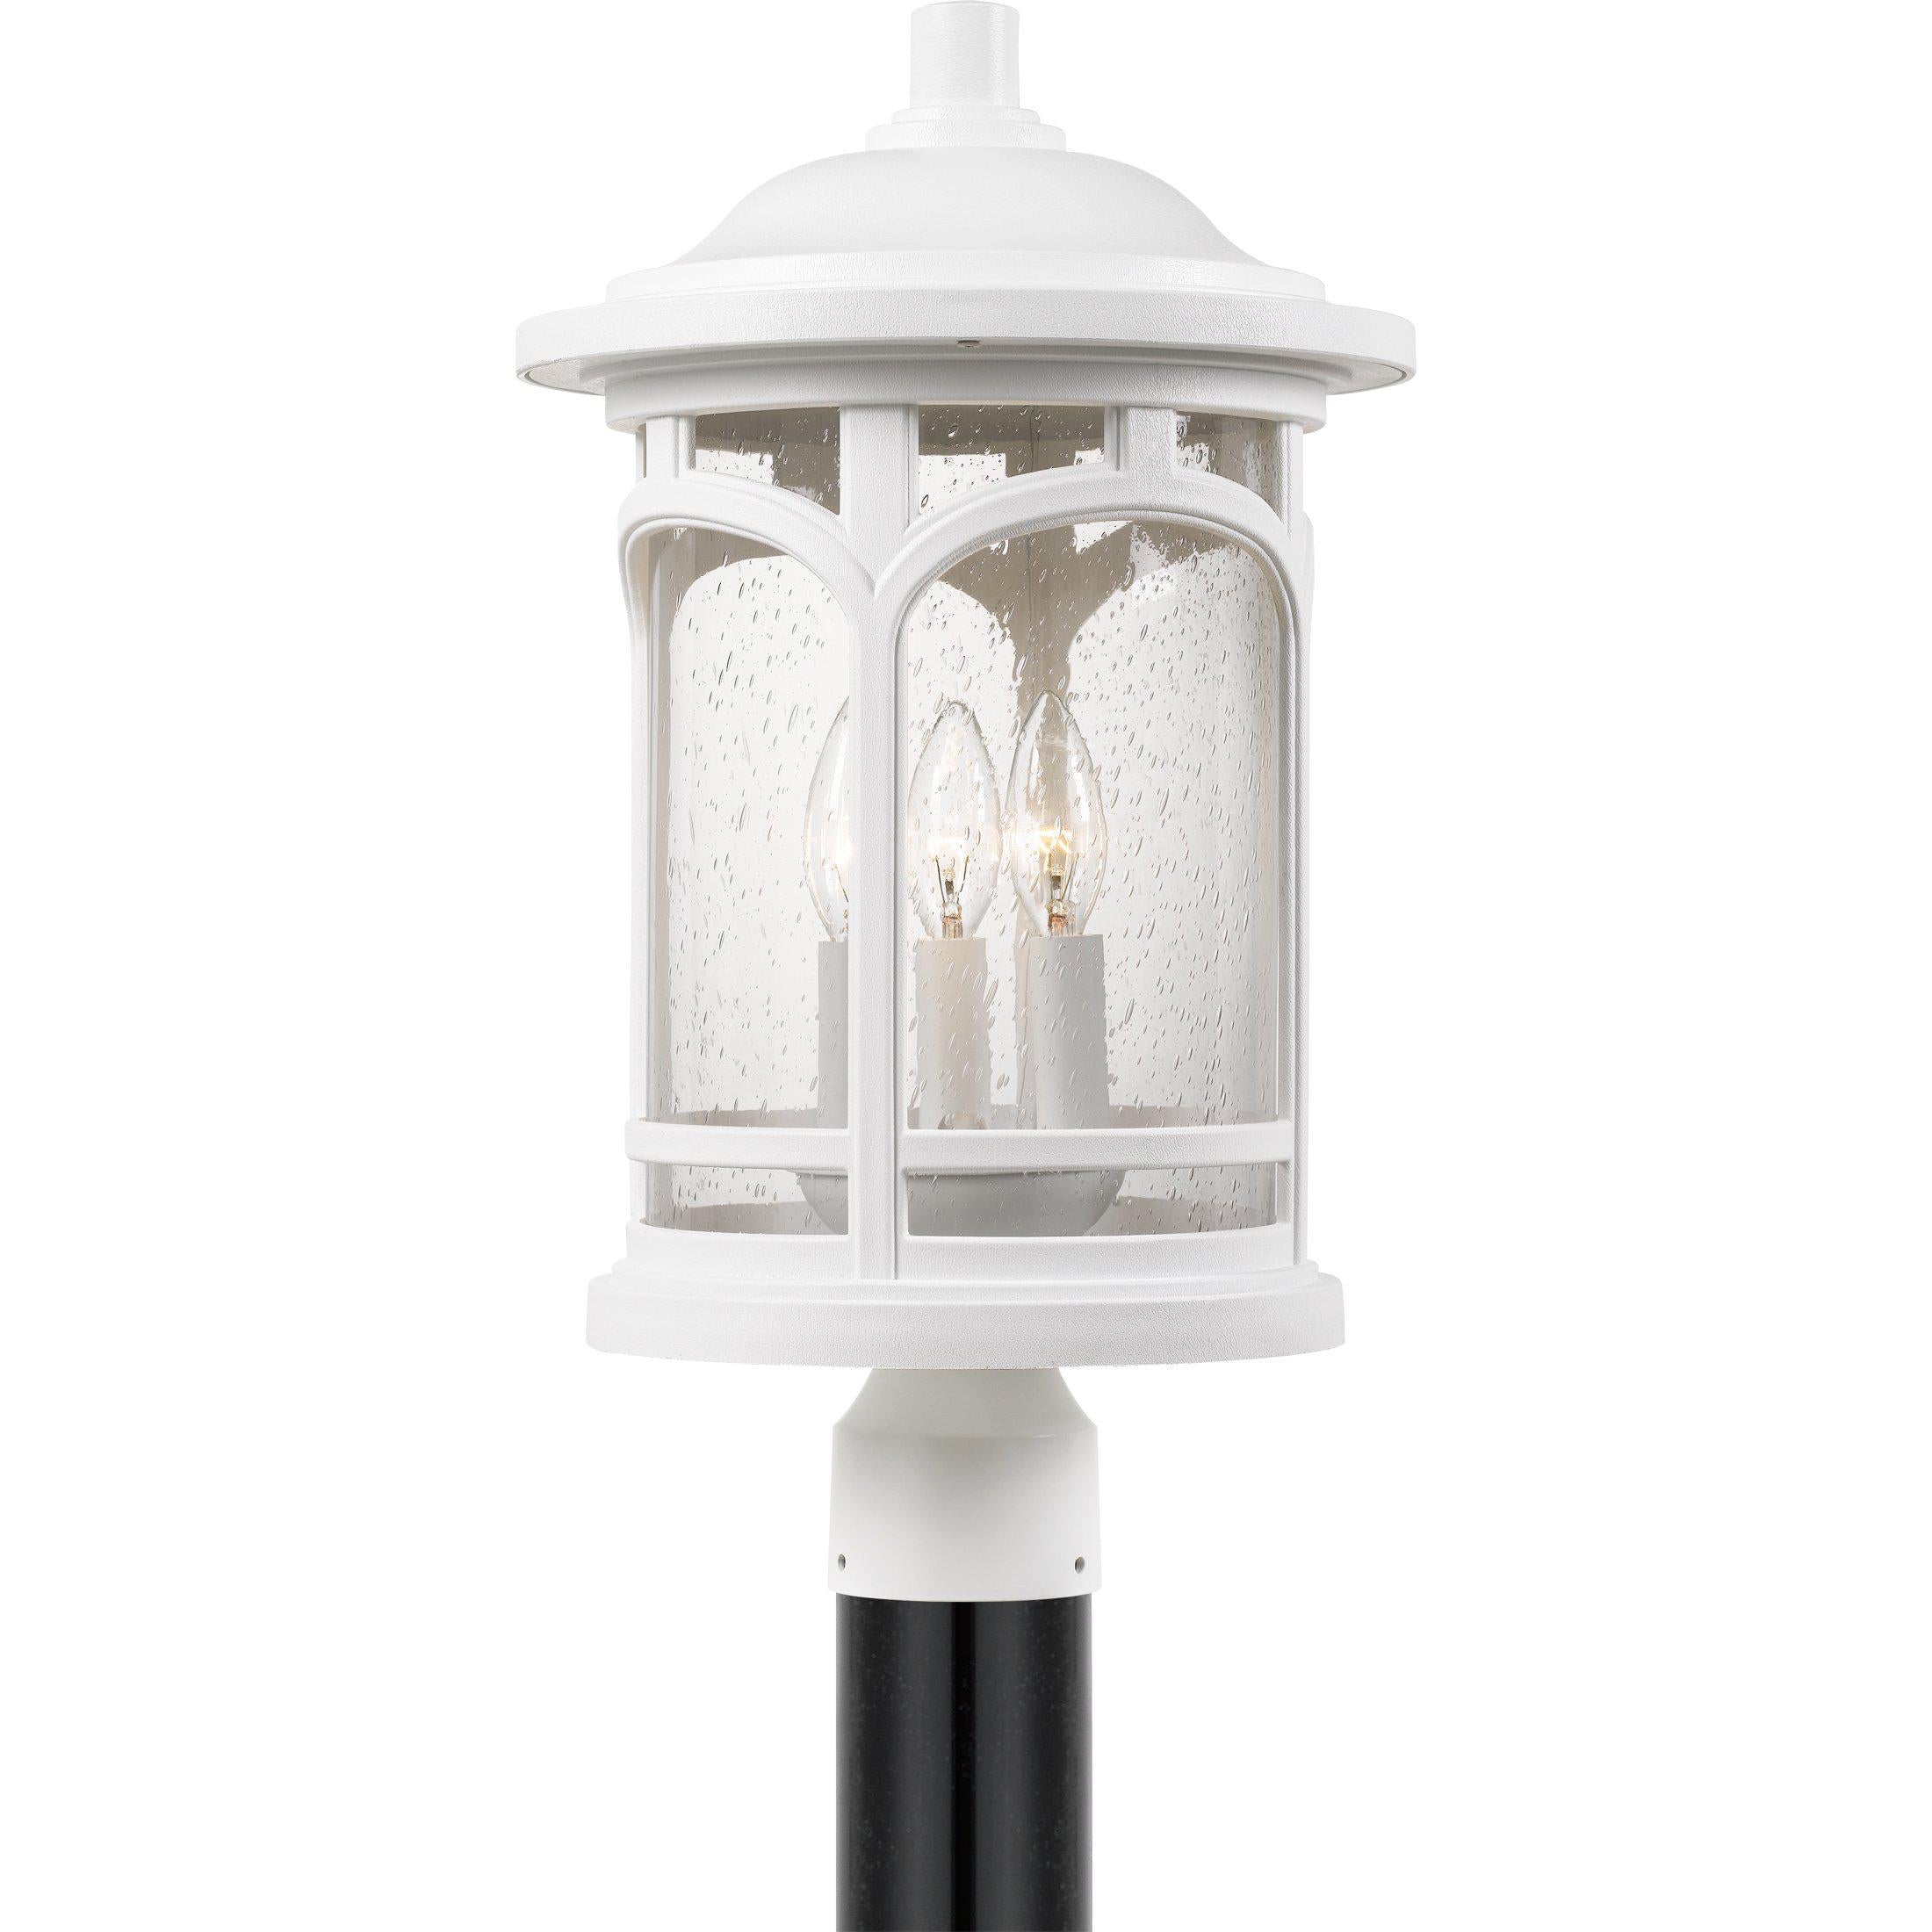 Quoizel  Marblehead Outdoor Lantern, Post Outdoor Light Fixture Quoizel White Lustre  